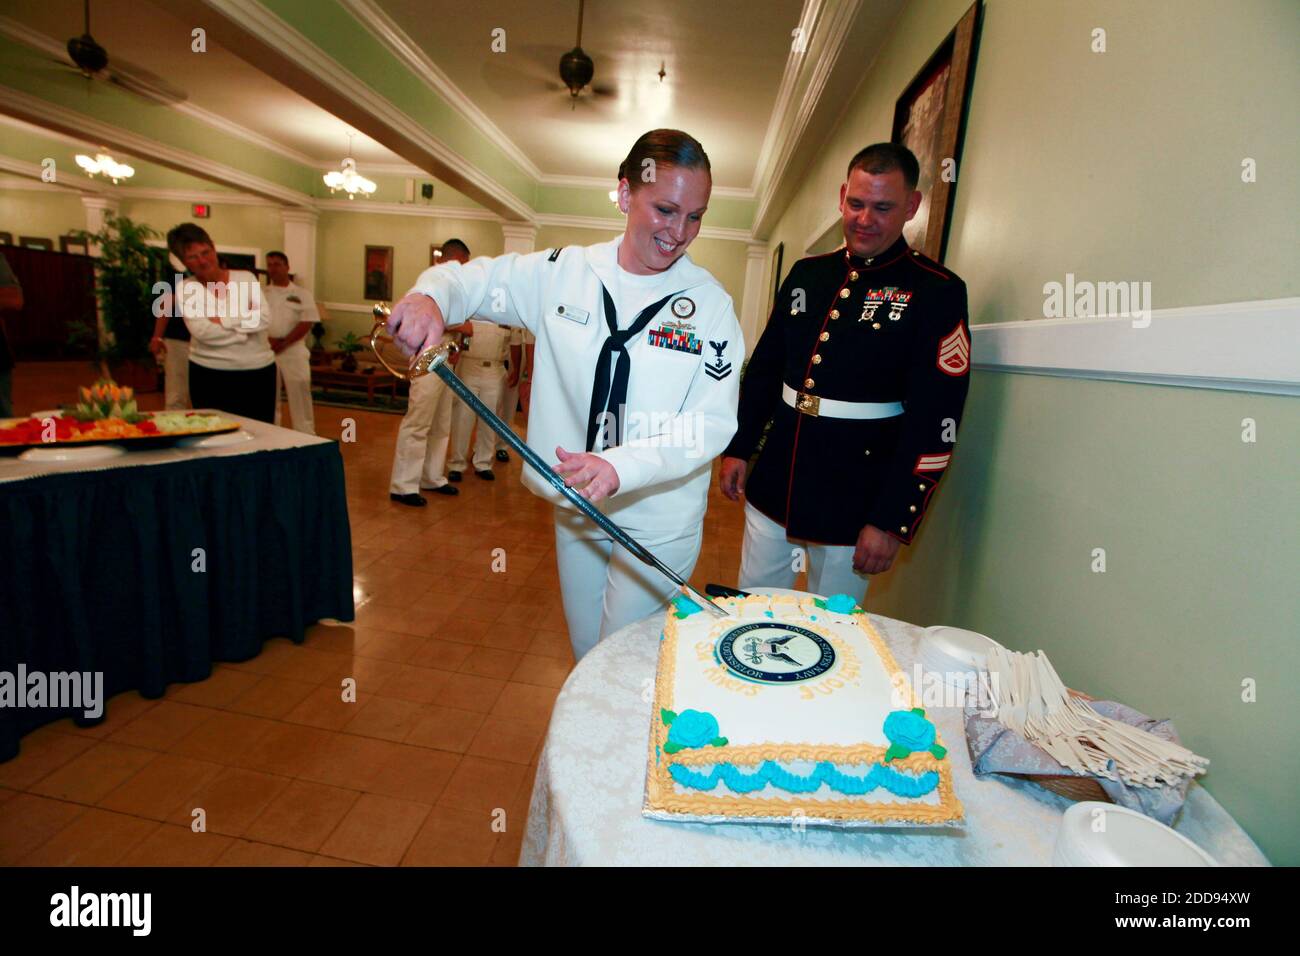 NO FILM, NO VIDEO, NO TV, NO DOCUMENTARY - Navy Petty Officer 2nd Class Desiree Rivers uses her Marine Corps husband's saber to cut her reenlistment cake at the Bayview Club at the U.S. Navy base at Guantanamo Bay, Cuba, on March 27, 2009. Her husband, Marine Staff Sgt. David Rivers, right, wore his dress blues for the occasion. Photo by John VanBeekum/Miami Herald/MCT/ABACAPRESS.COM Stock Photo